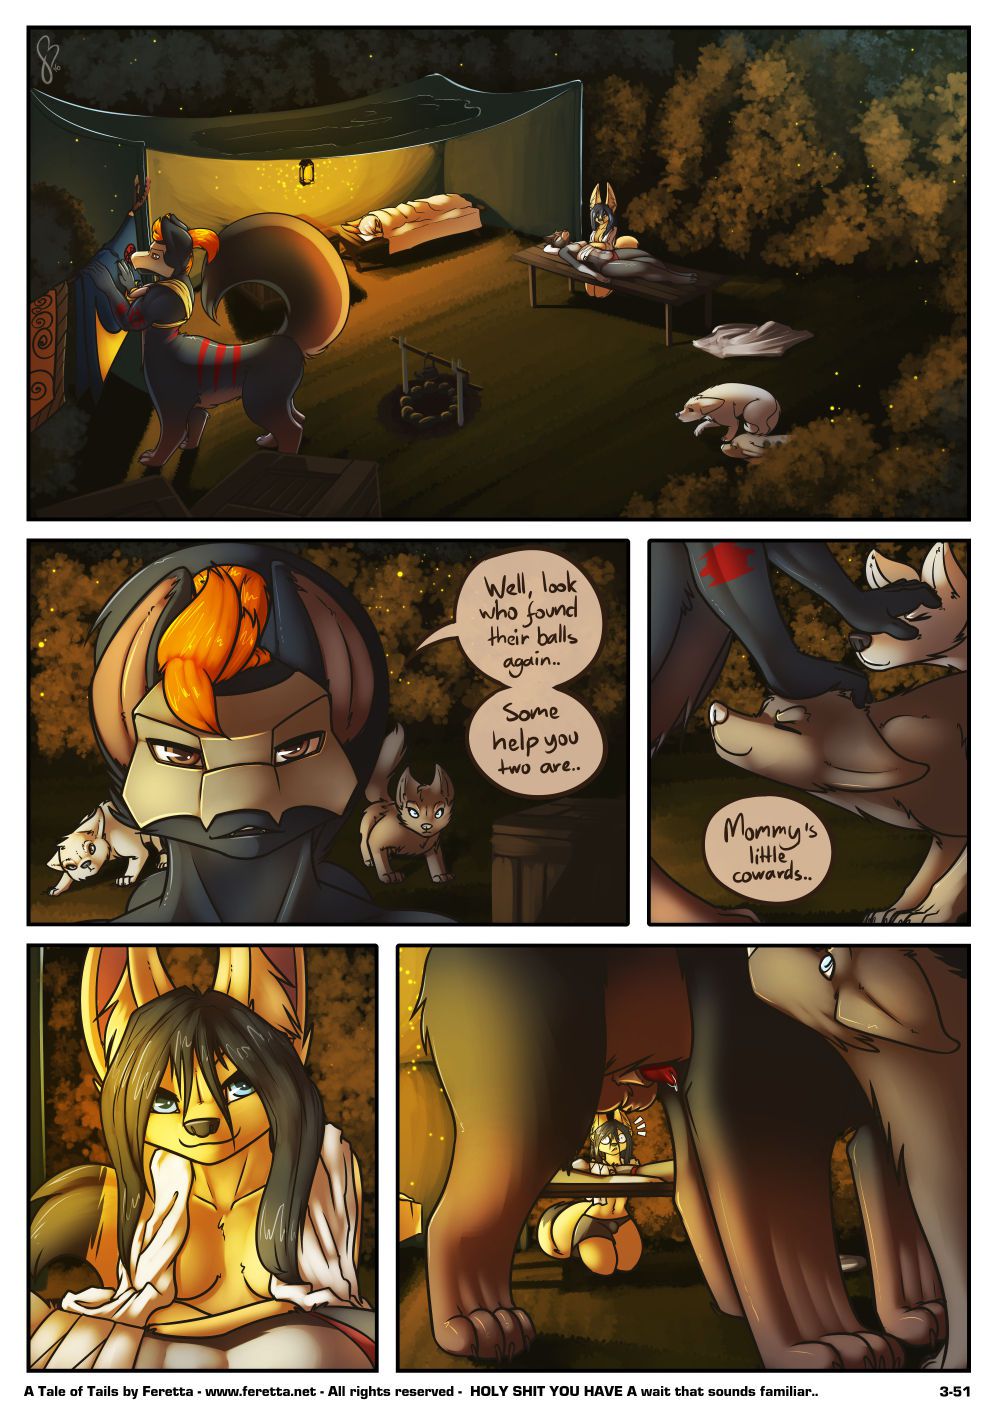 [Feretta] Farellian Legends: A Tale of Tails (w/Extras) [Ongoing] 140